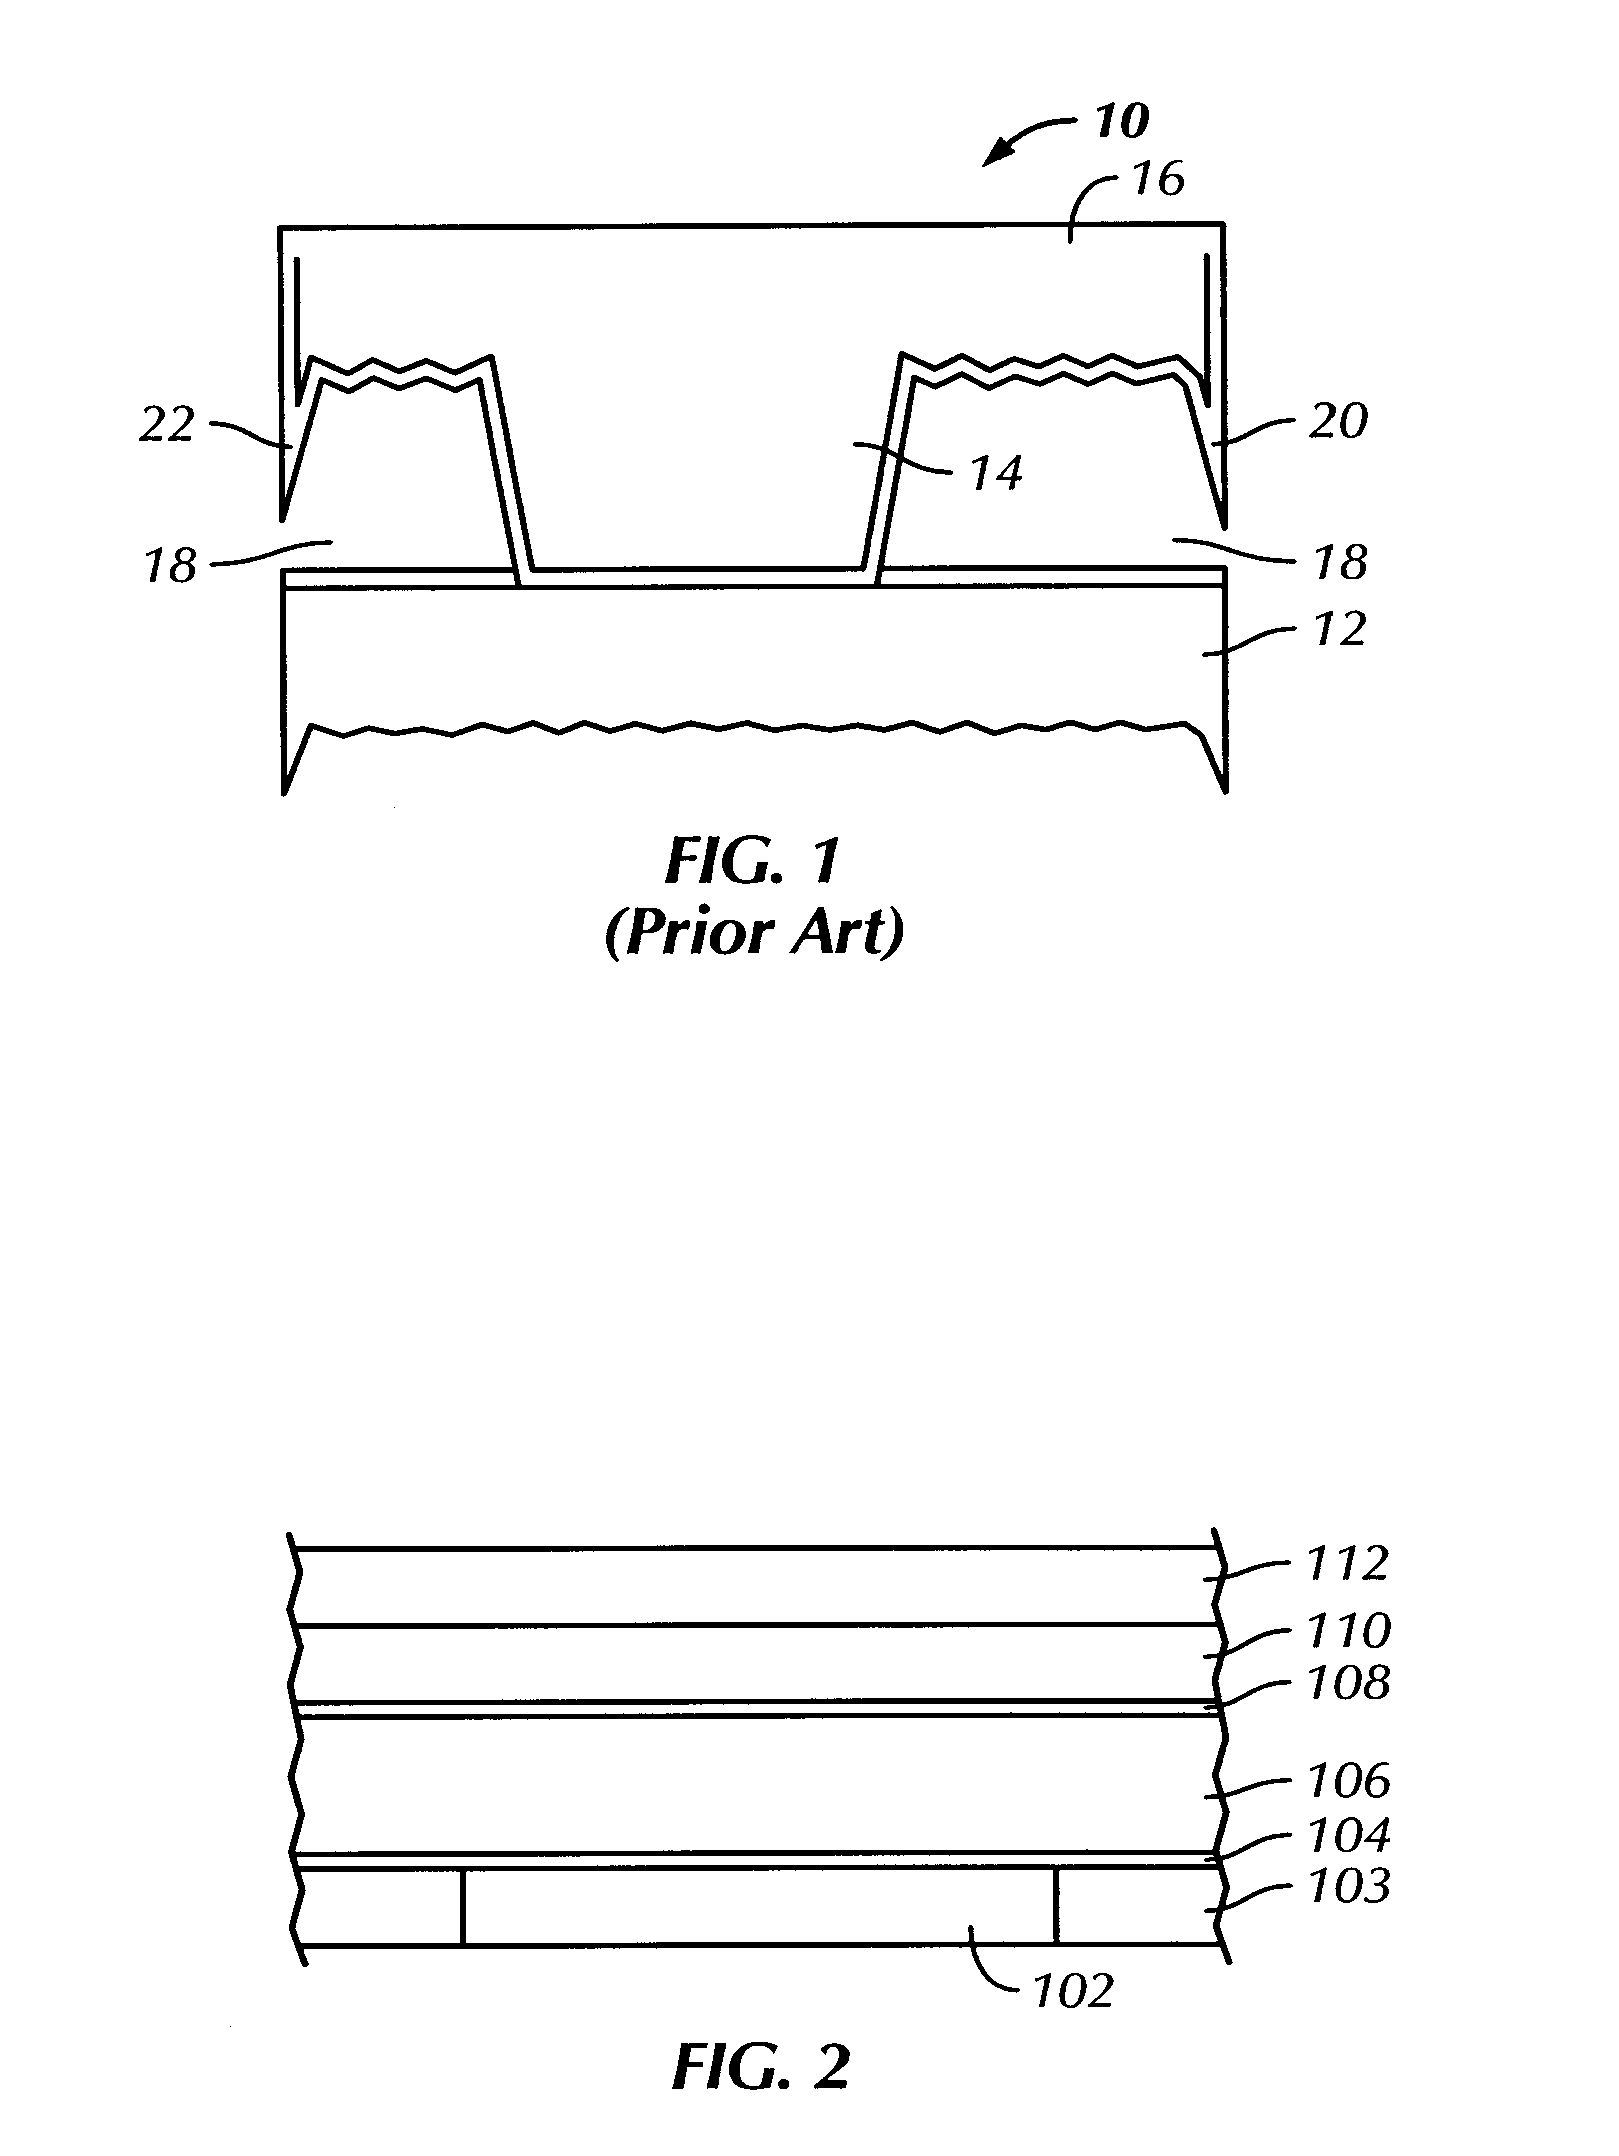 Method of Forming Metal Interconnect Structures in Ultra Low-K Dielectrics